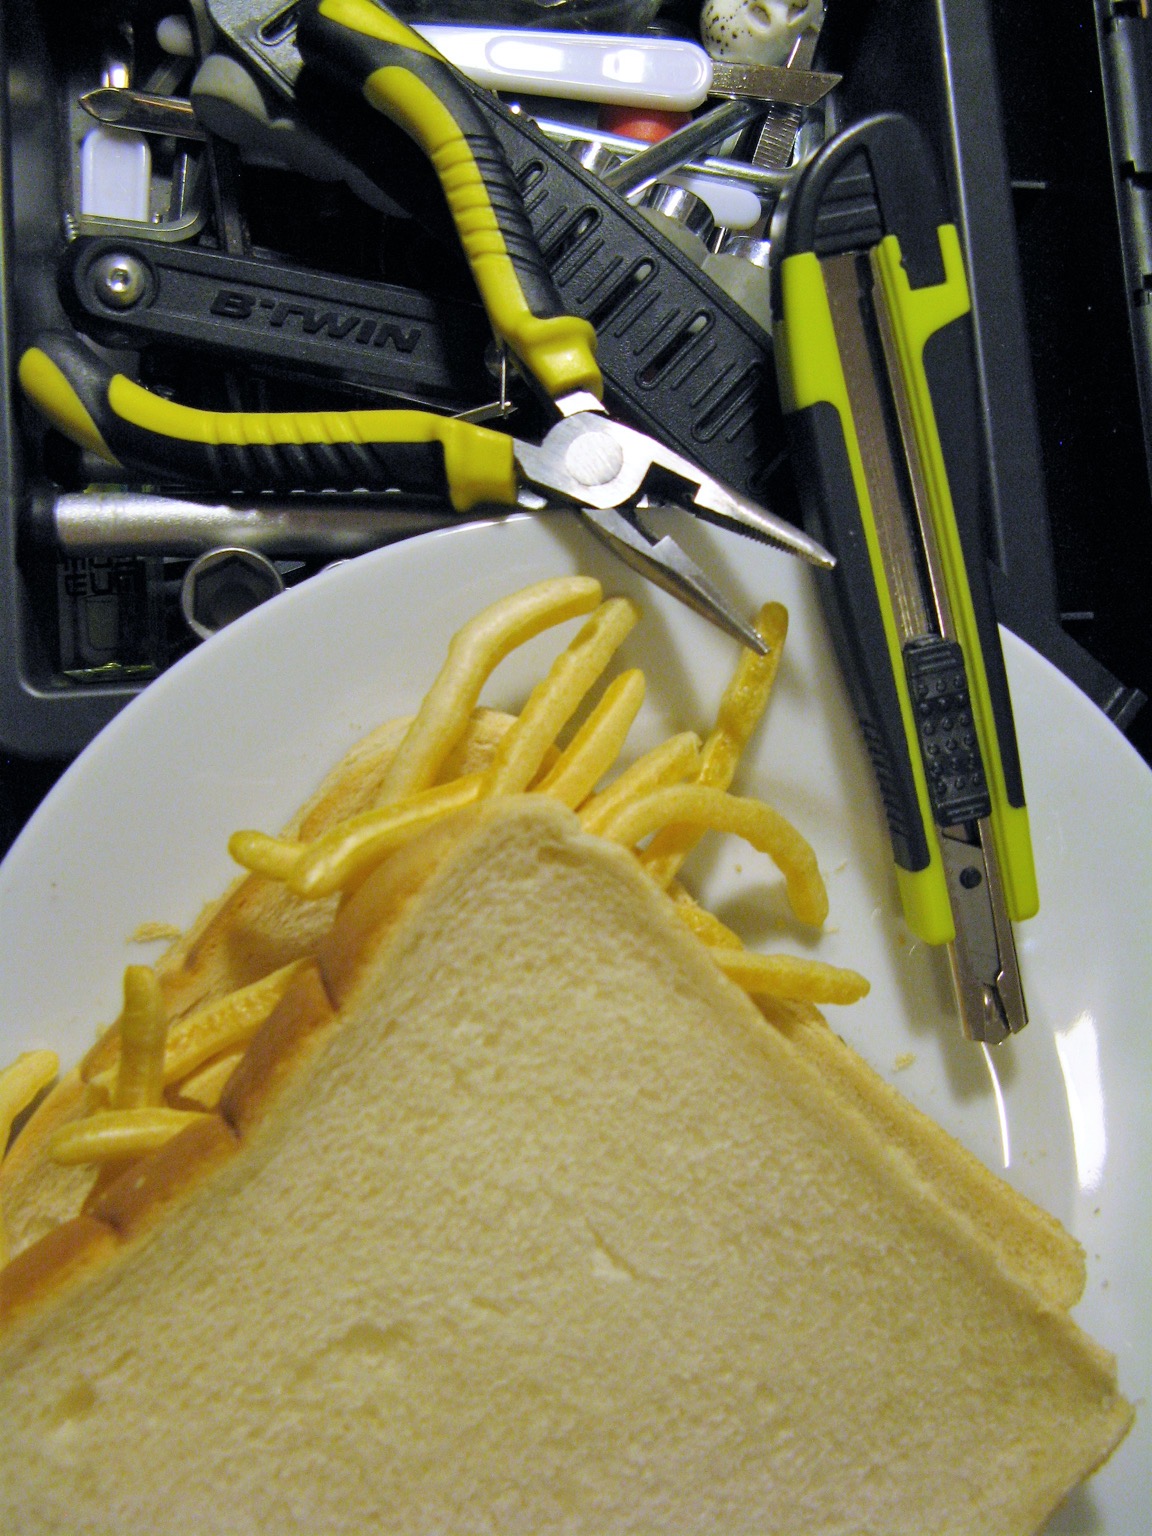 Toolkit containing a French Fries sandwich